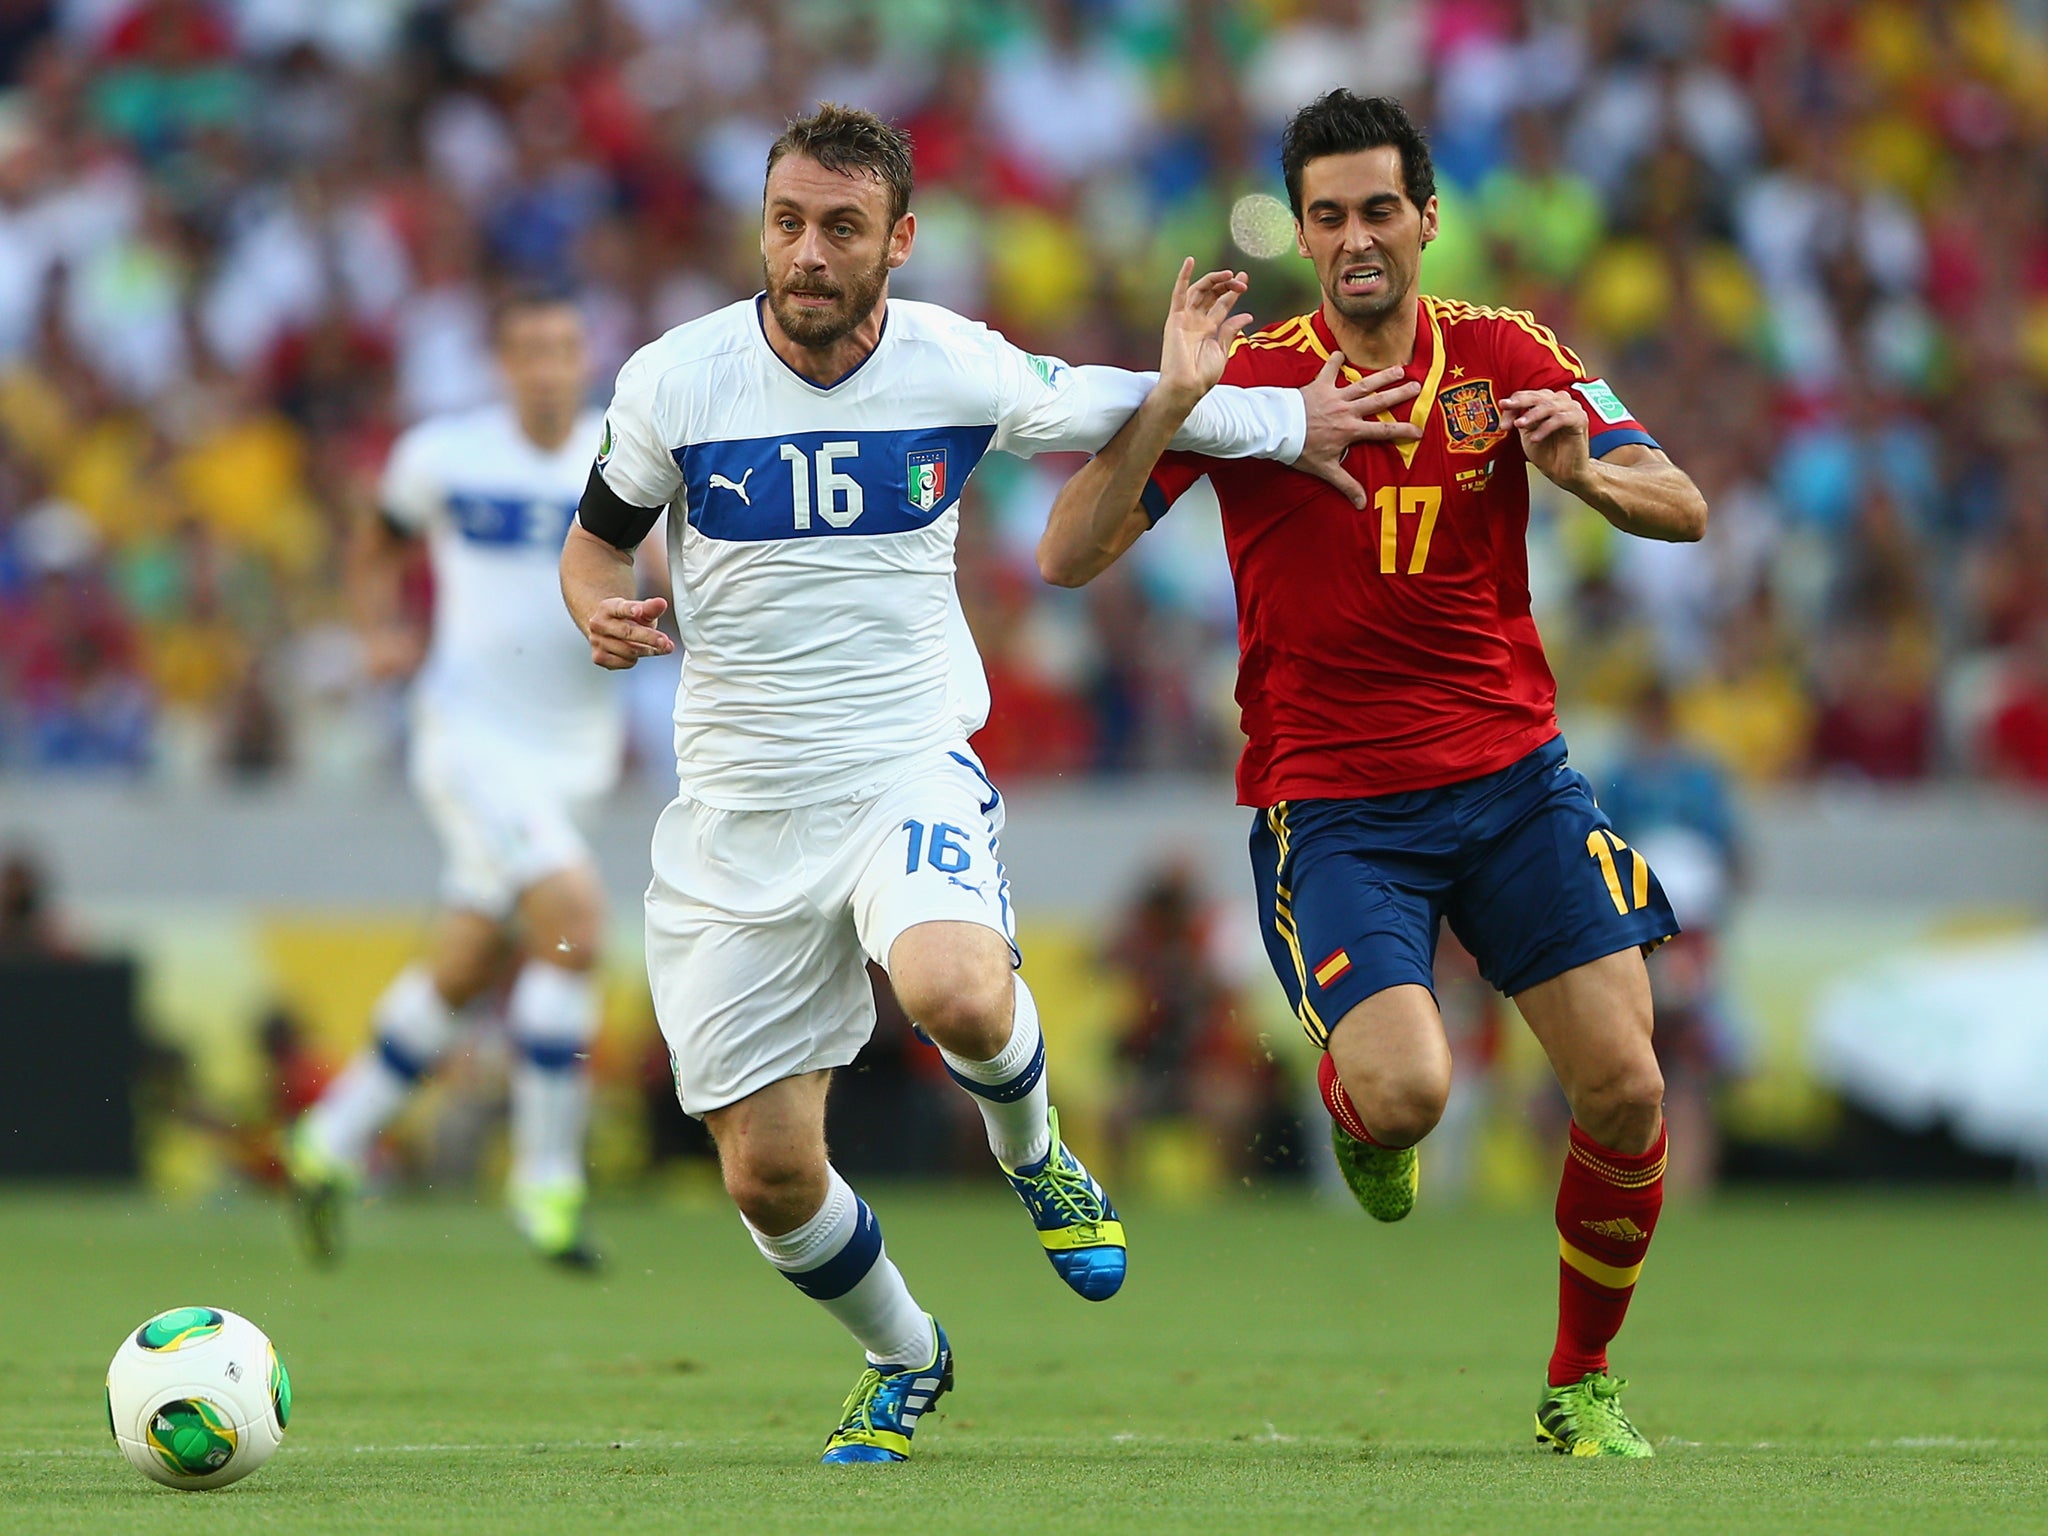 Daniele De Rossi in action for Italy during the Confederations Cup with Spain